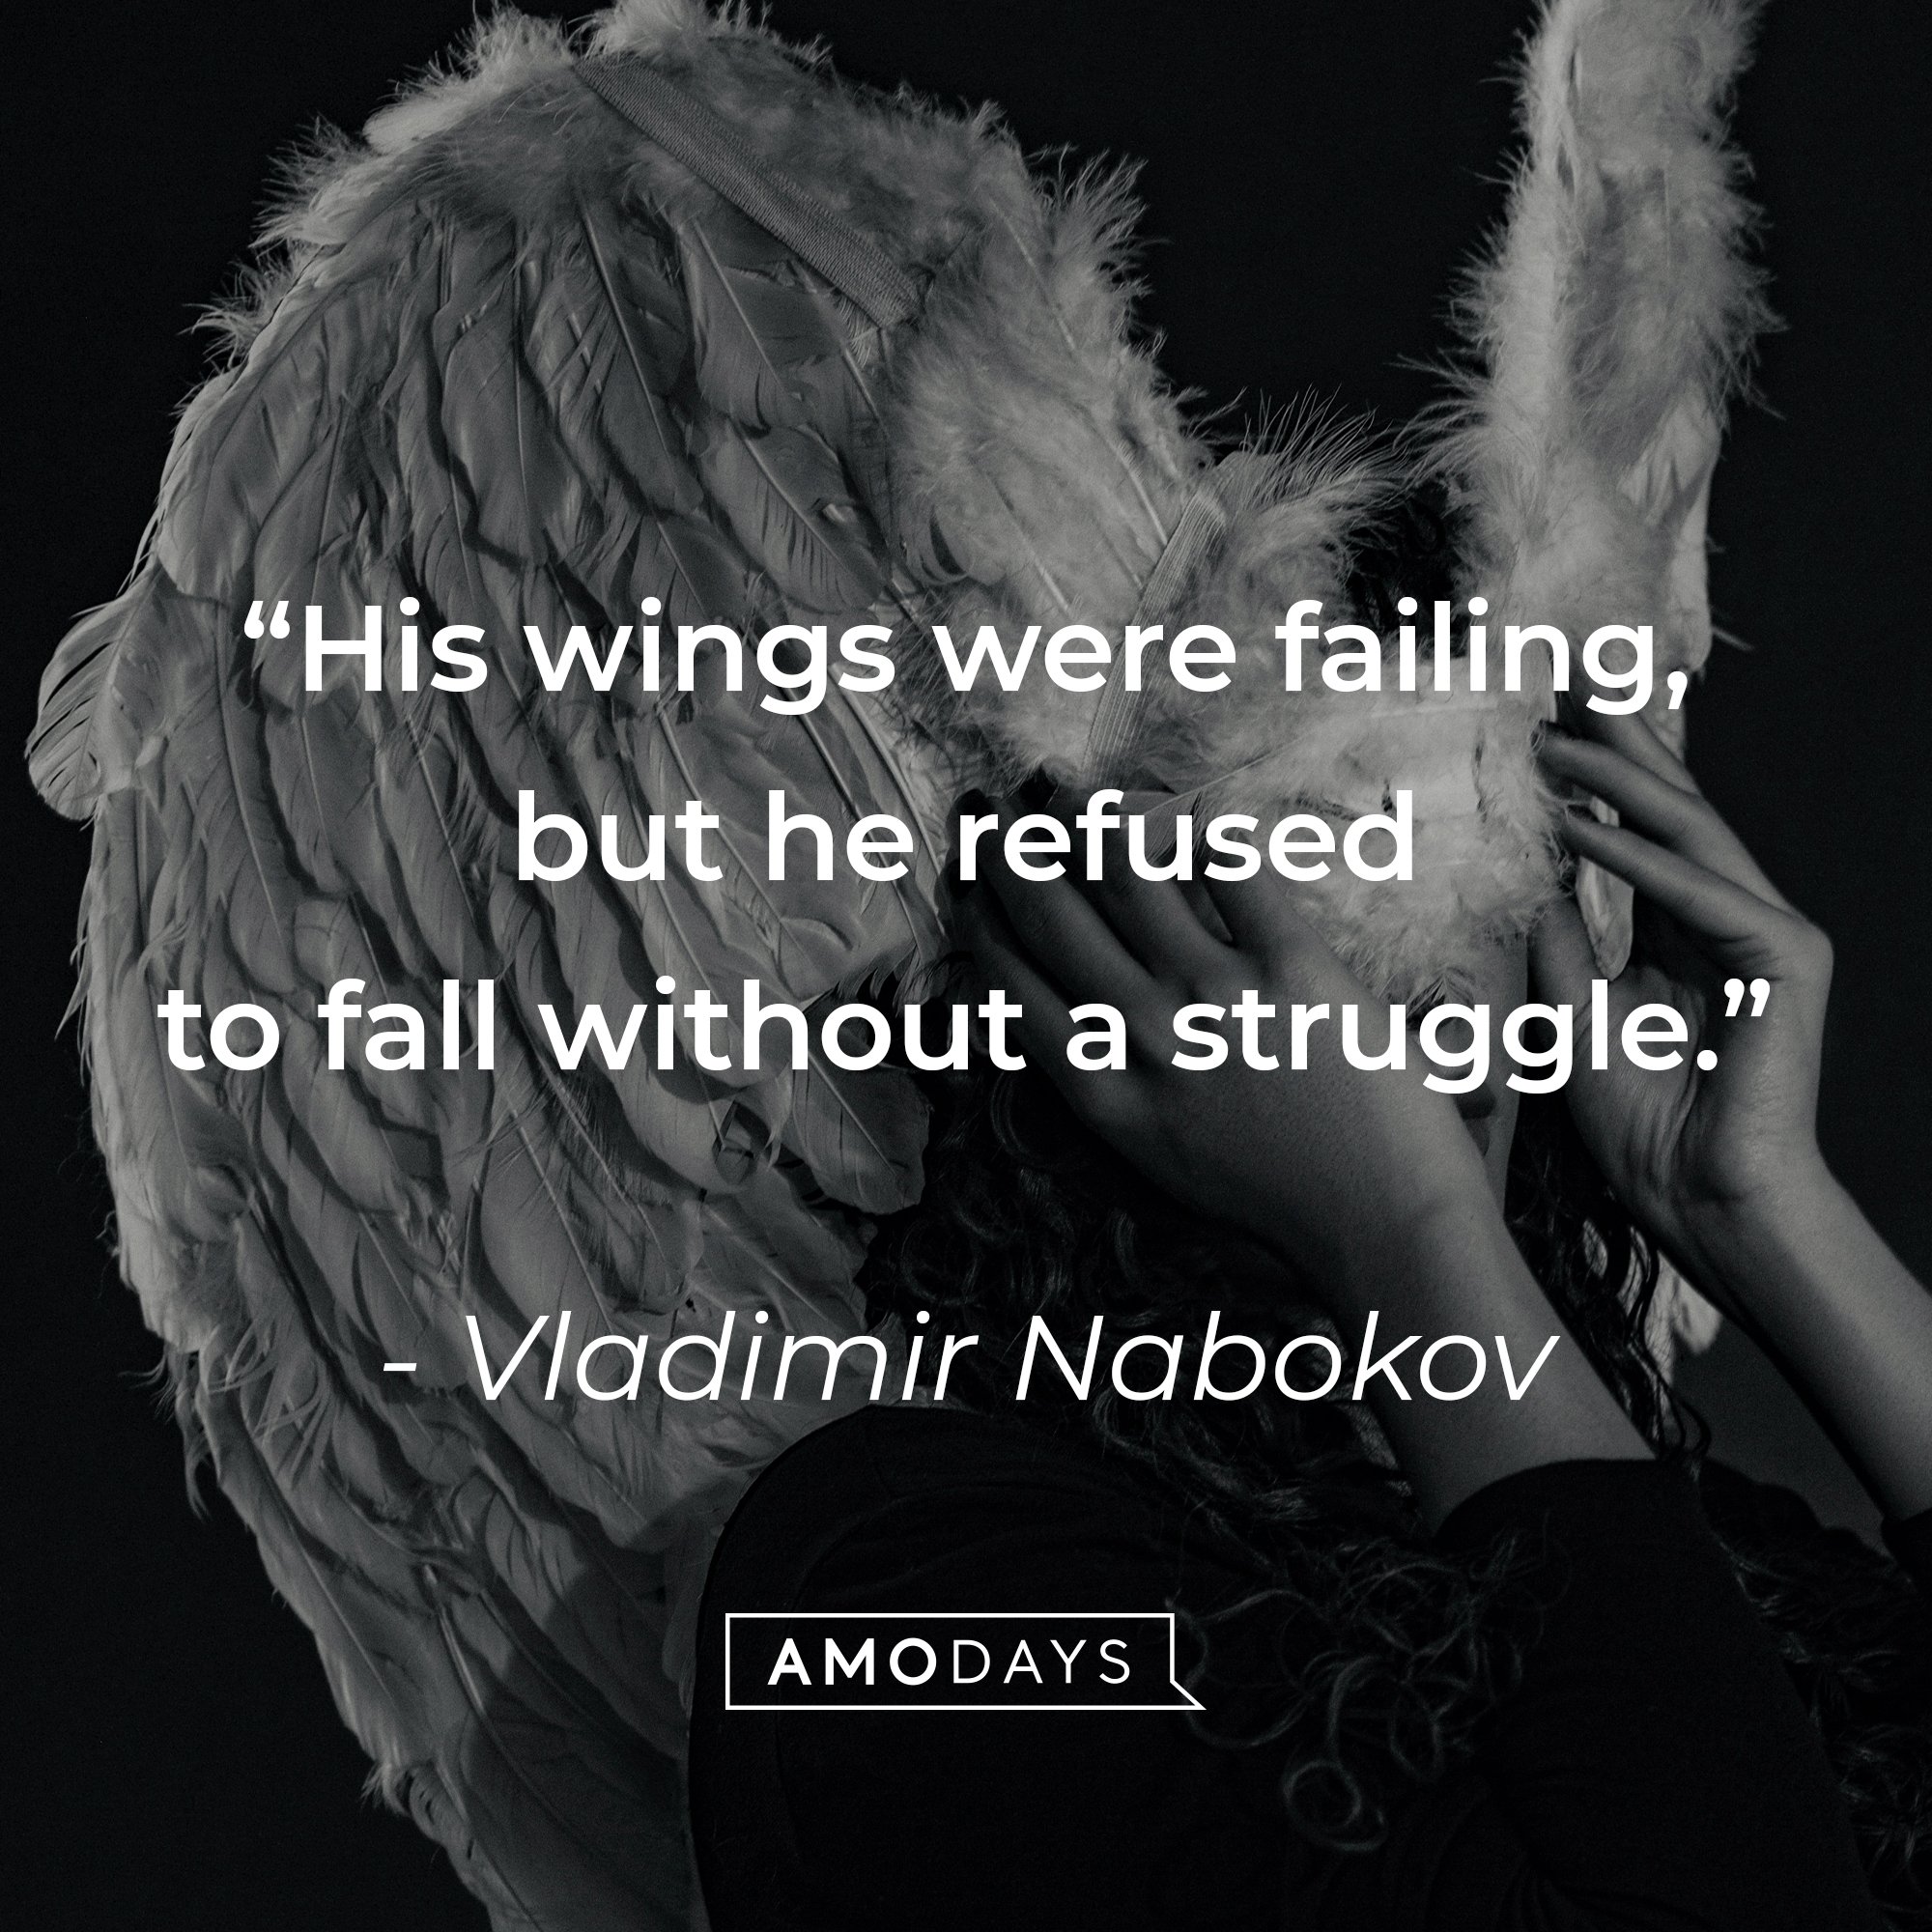 Vladimir Nabokov's quote: "His wings were failing, but he refused to fall without a struggle." | Image: AmoDays